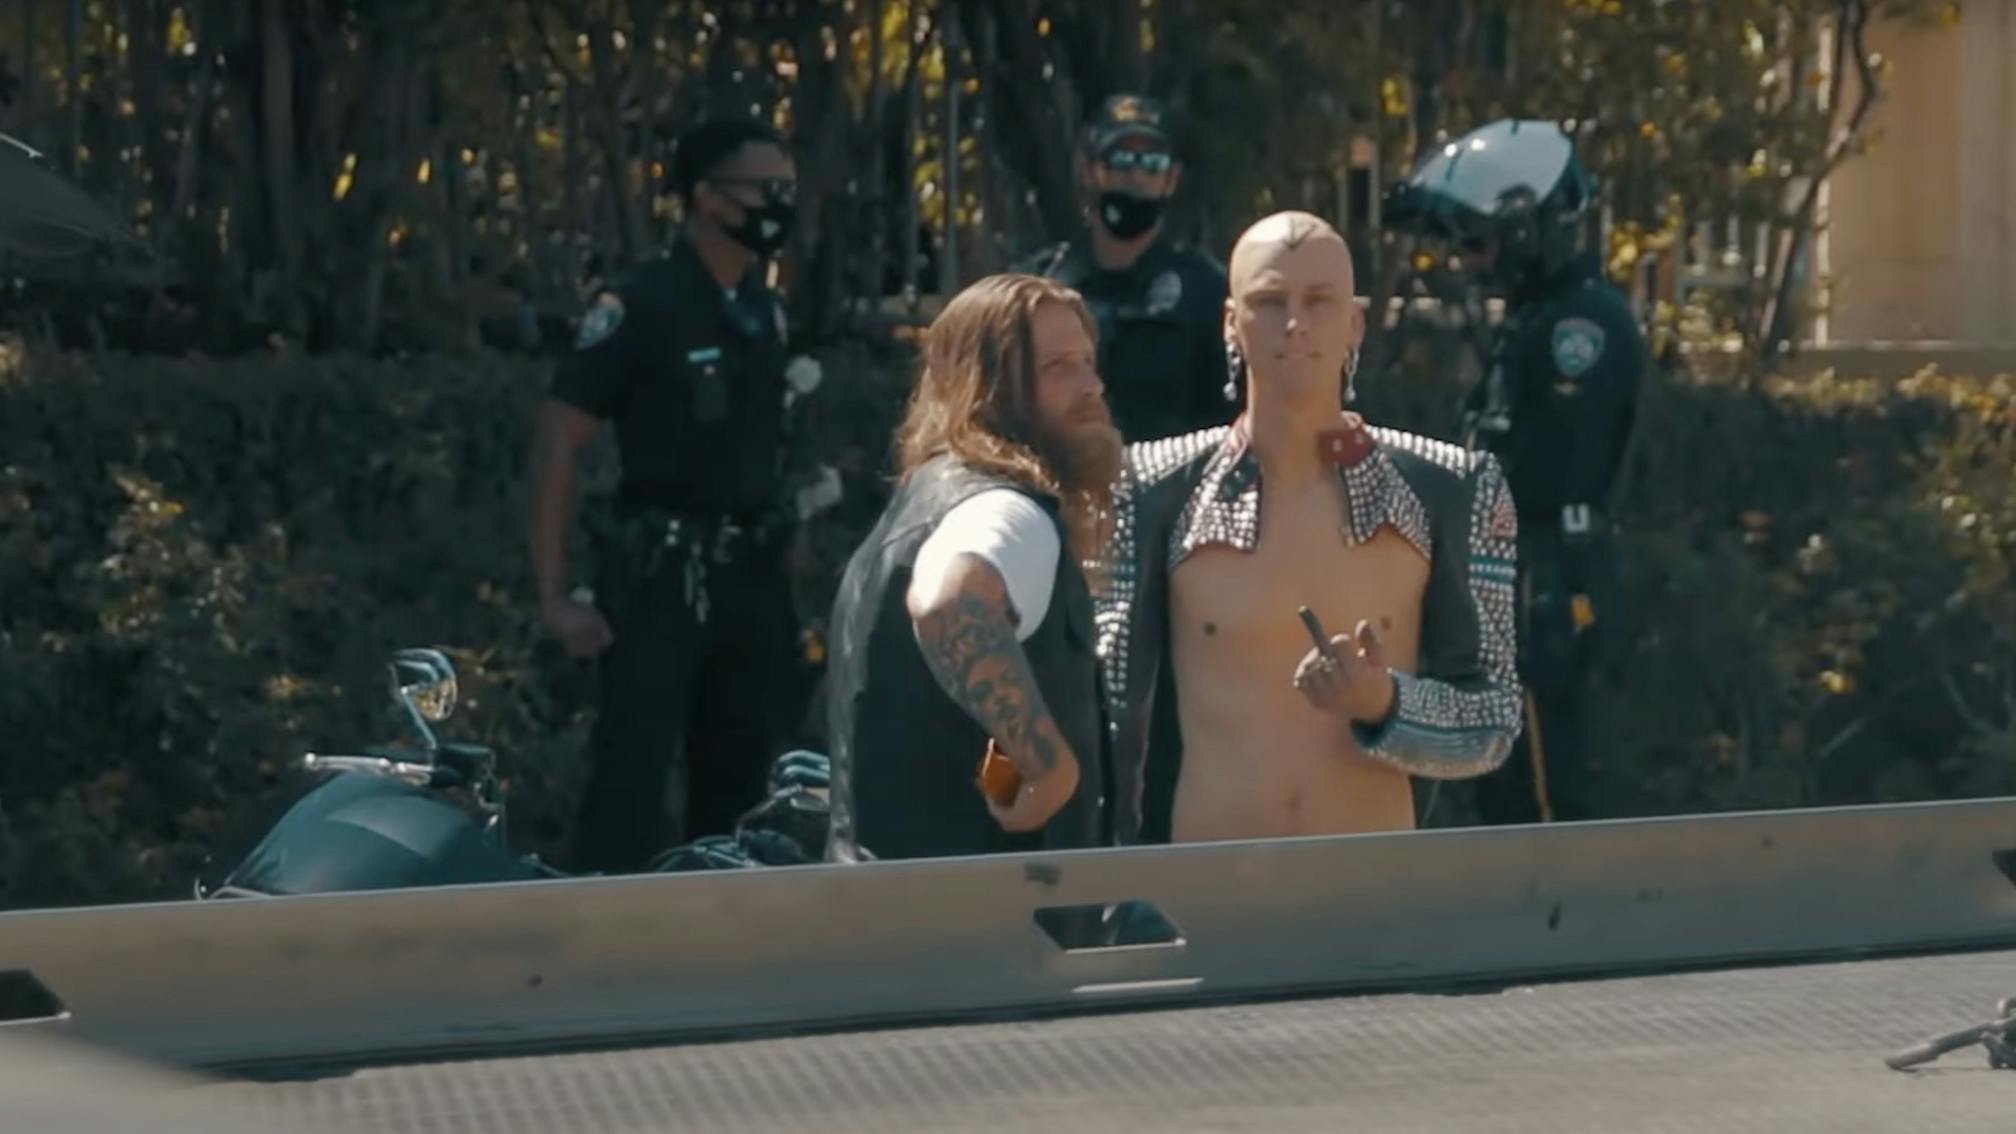 Machine Gun Kelly gets pulled over by police in making-of papercuts video 